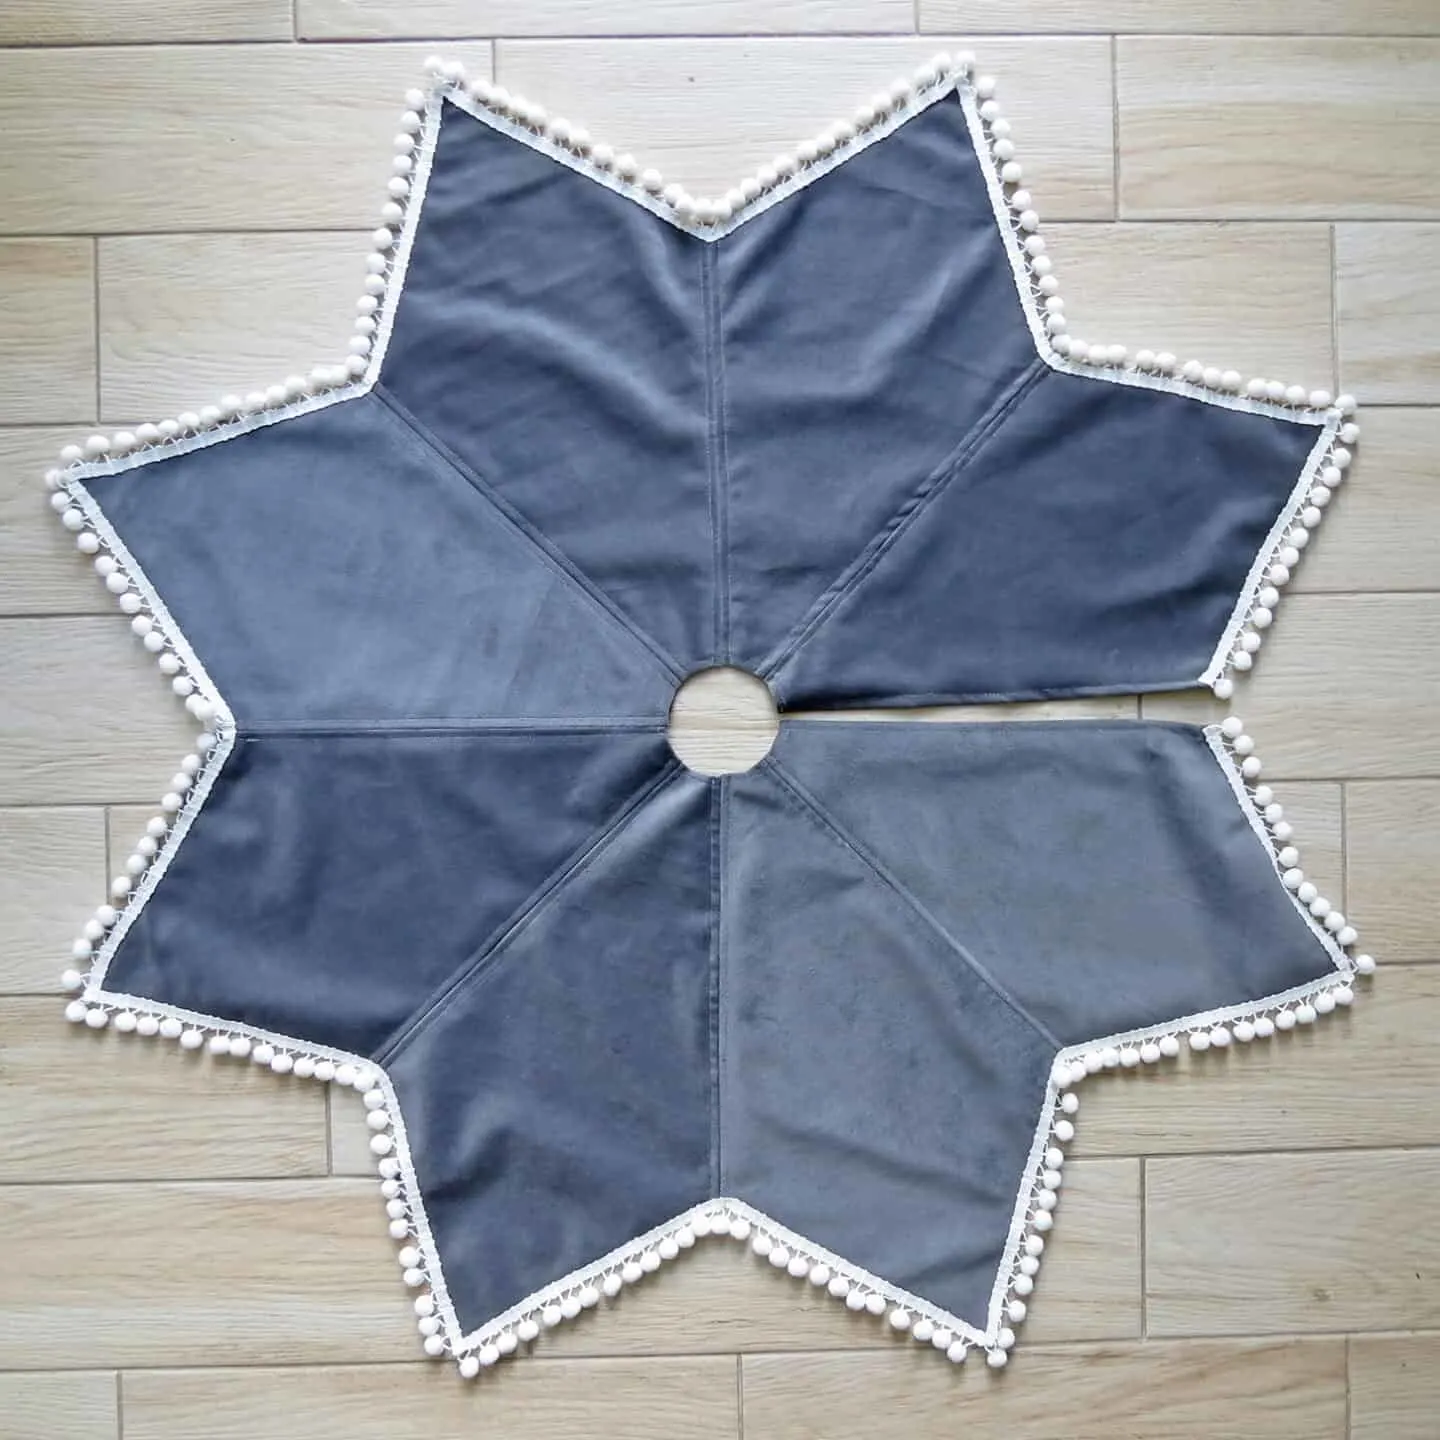 Sewing star-shaped tree skirt